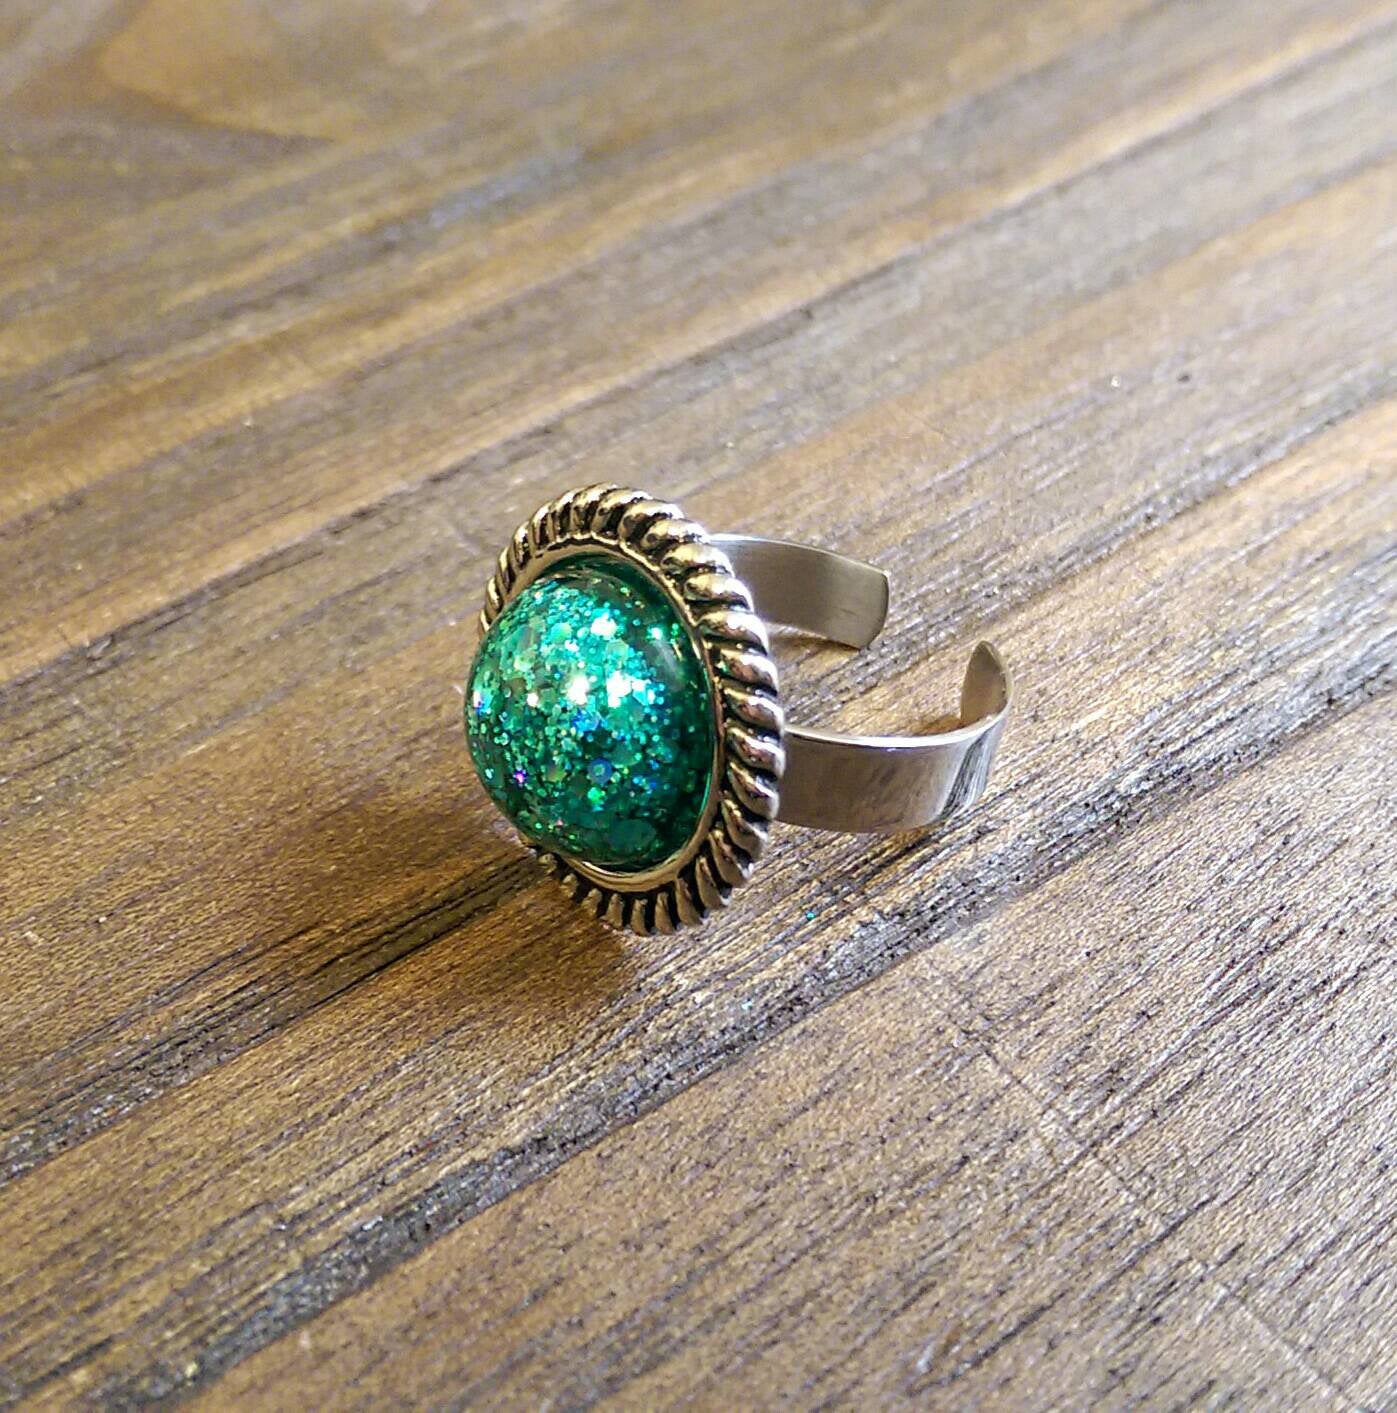 Resin Teal Glitter Ring, Statement Resin Ring, Stainless Steel Statement Ring - Silver and Resin Designs